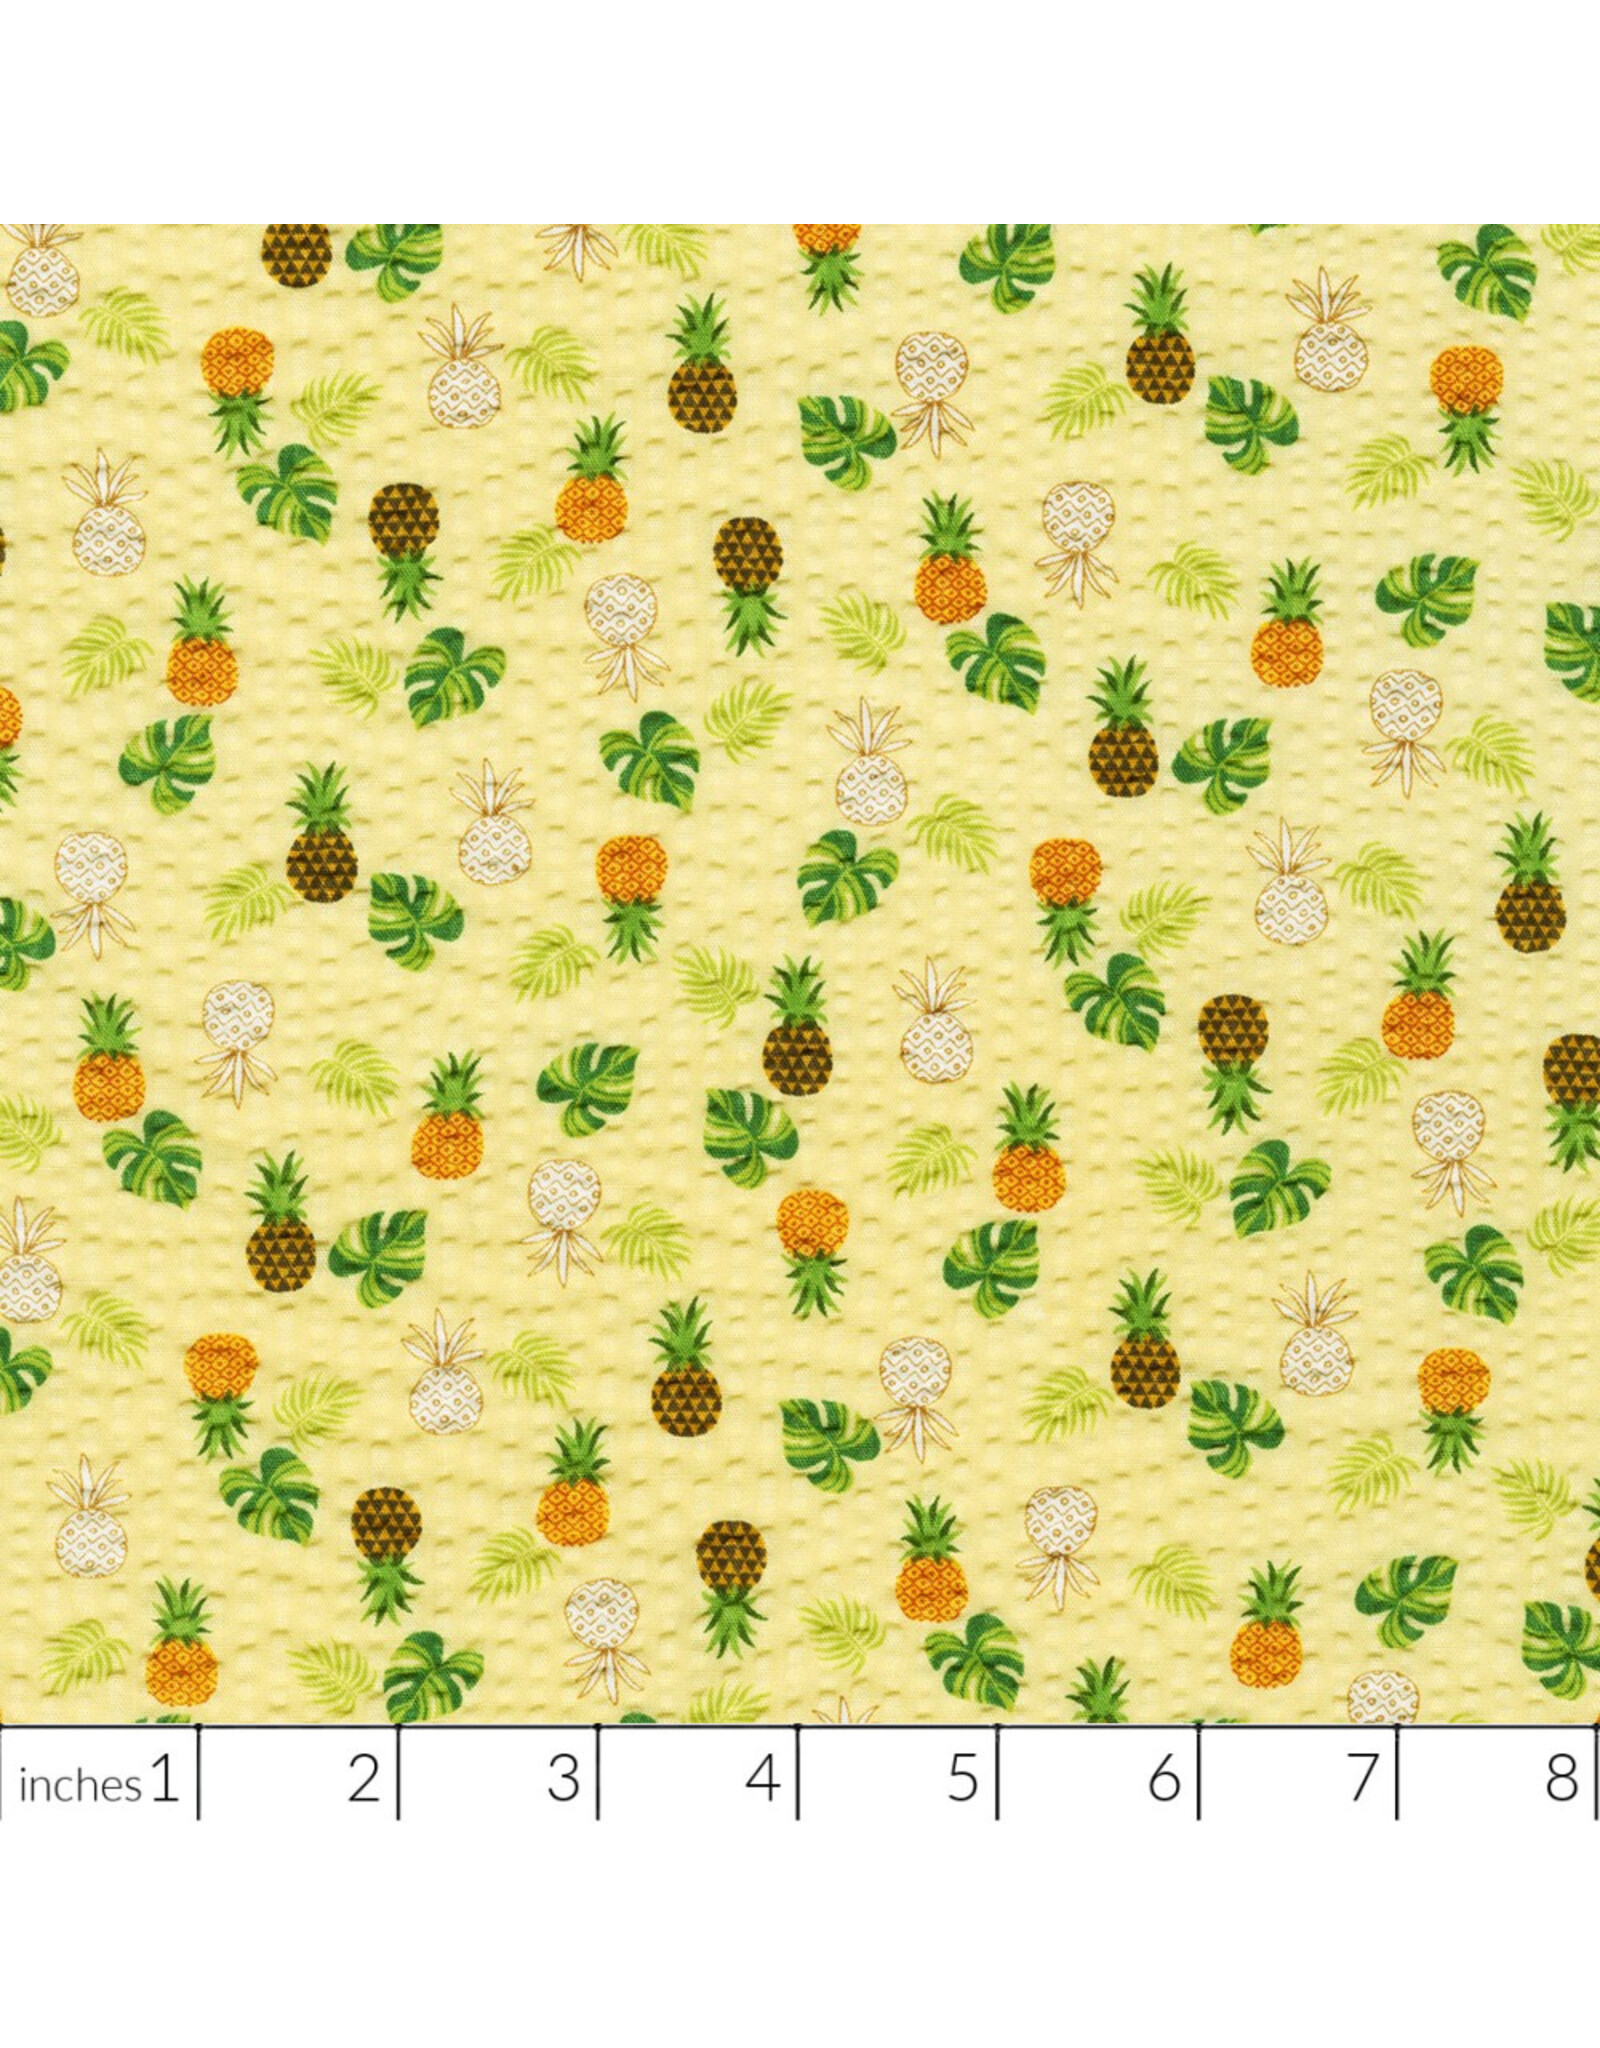 Sevenberry Plissé Collection, Pineapple in Yellow, Fabric Half-Yards